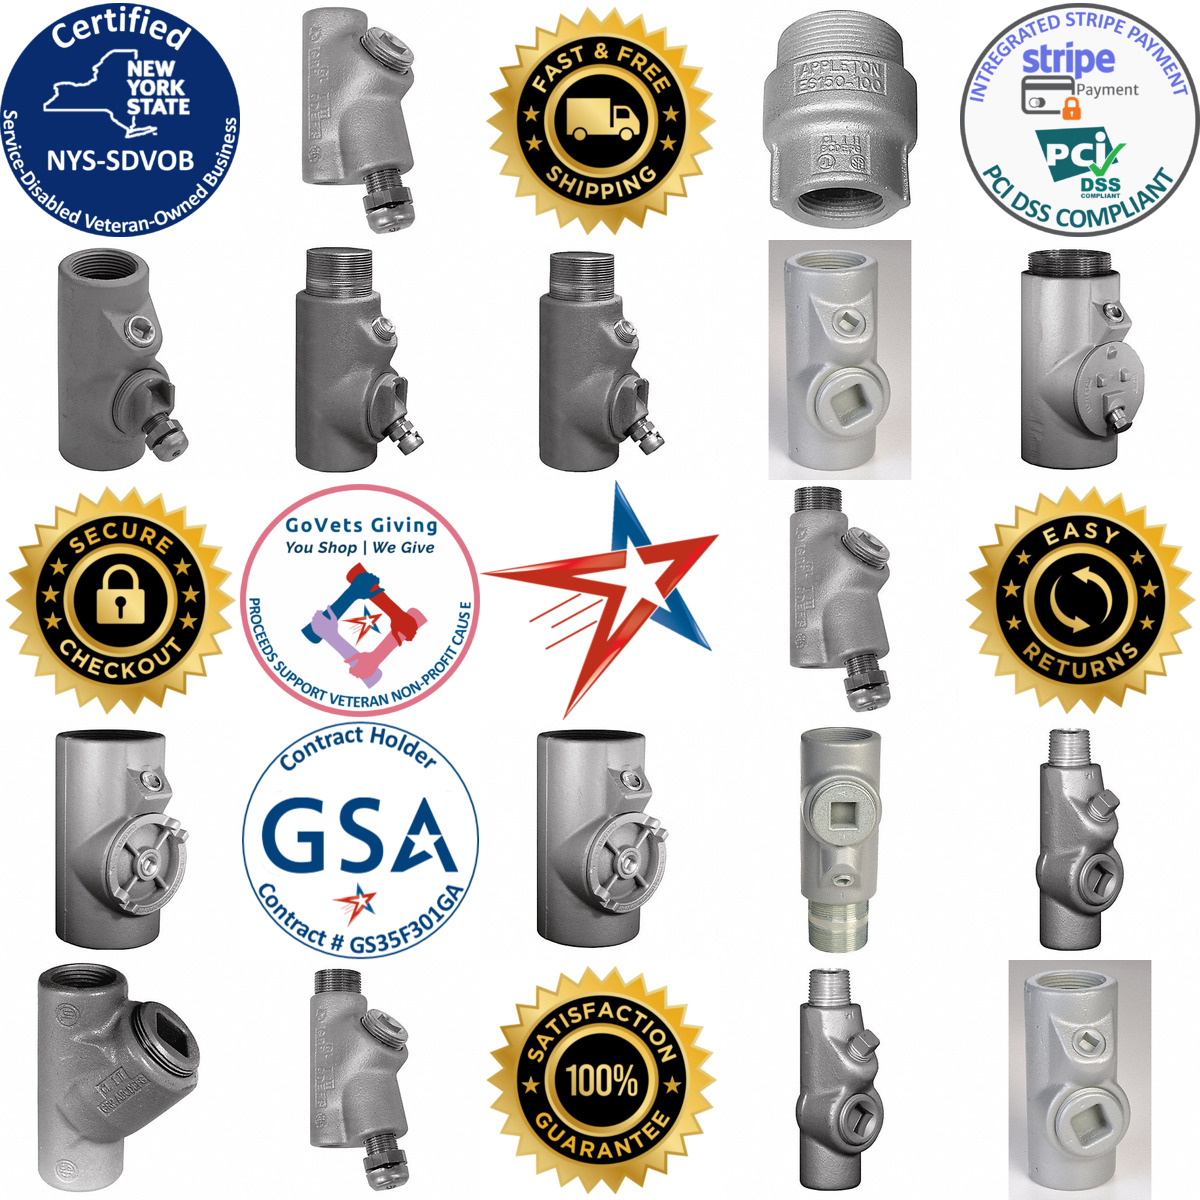 A selection of Hazardous Location Sealing Fittings products on GoVets